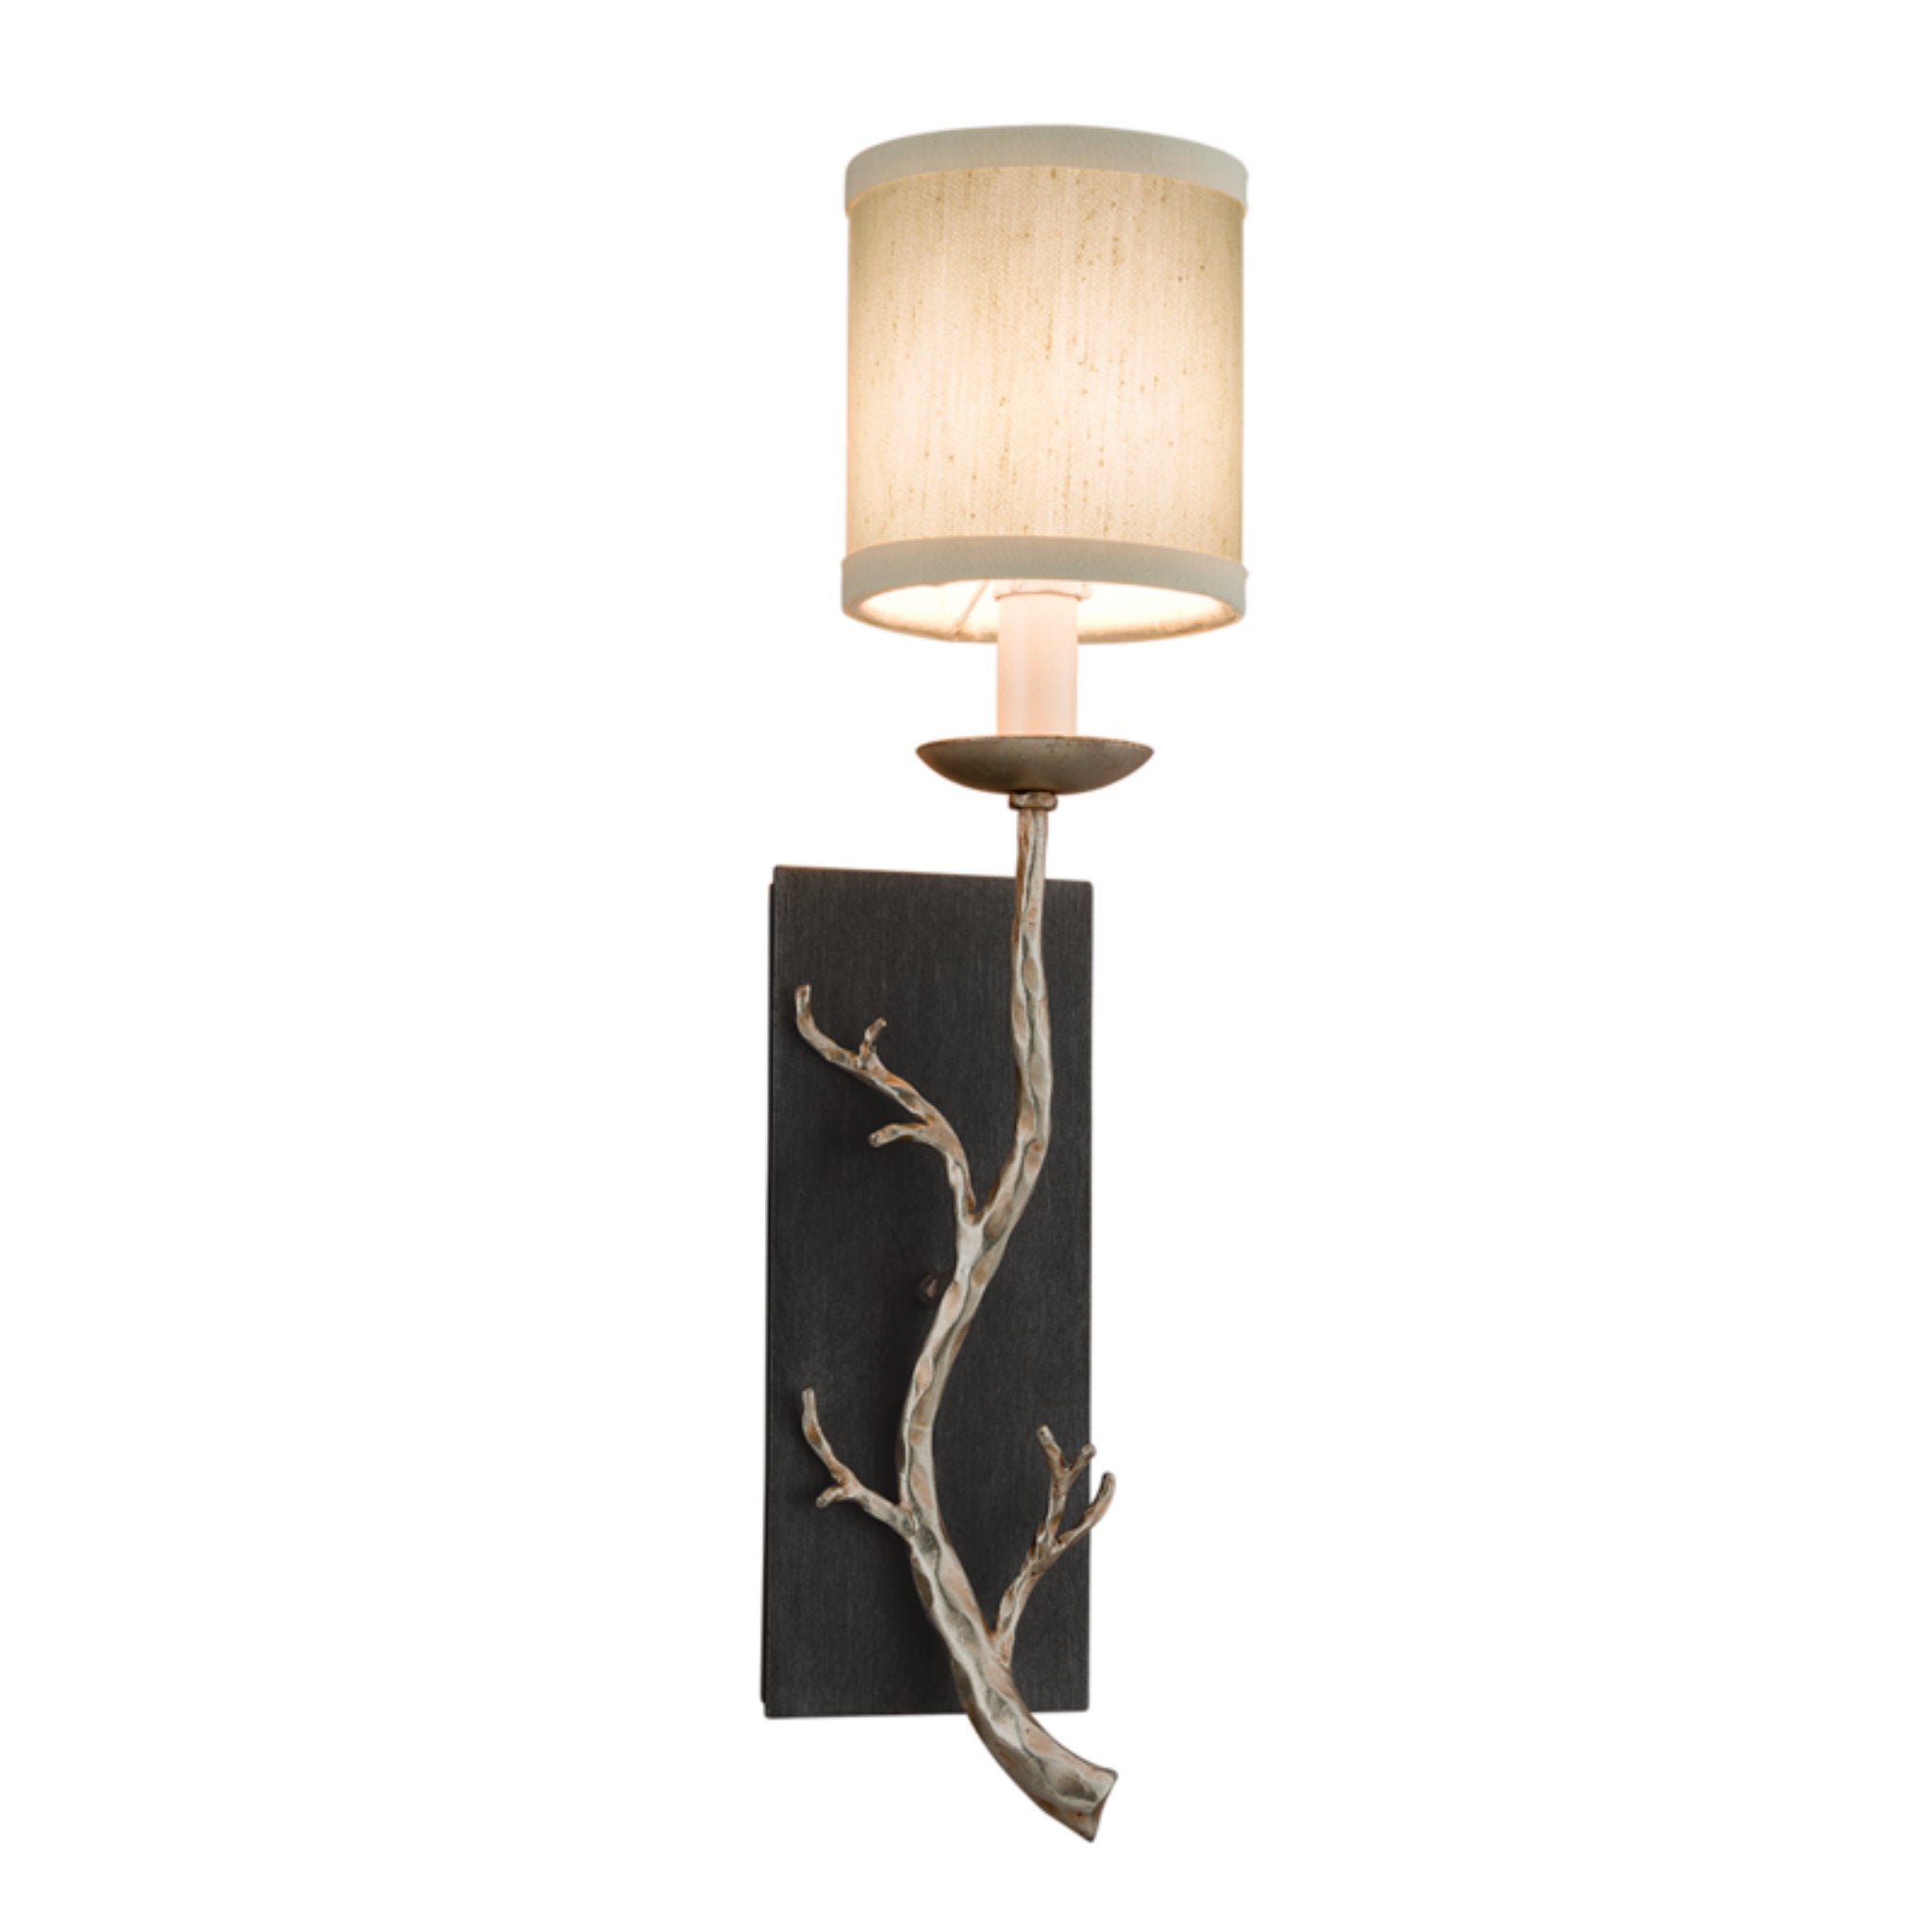 Adirondack 1 Light Wall Sconce in Graphite/Warm Silver Leaf